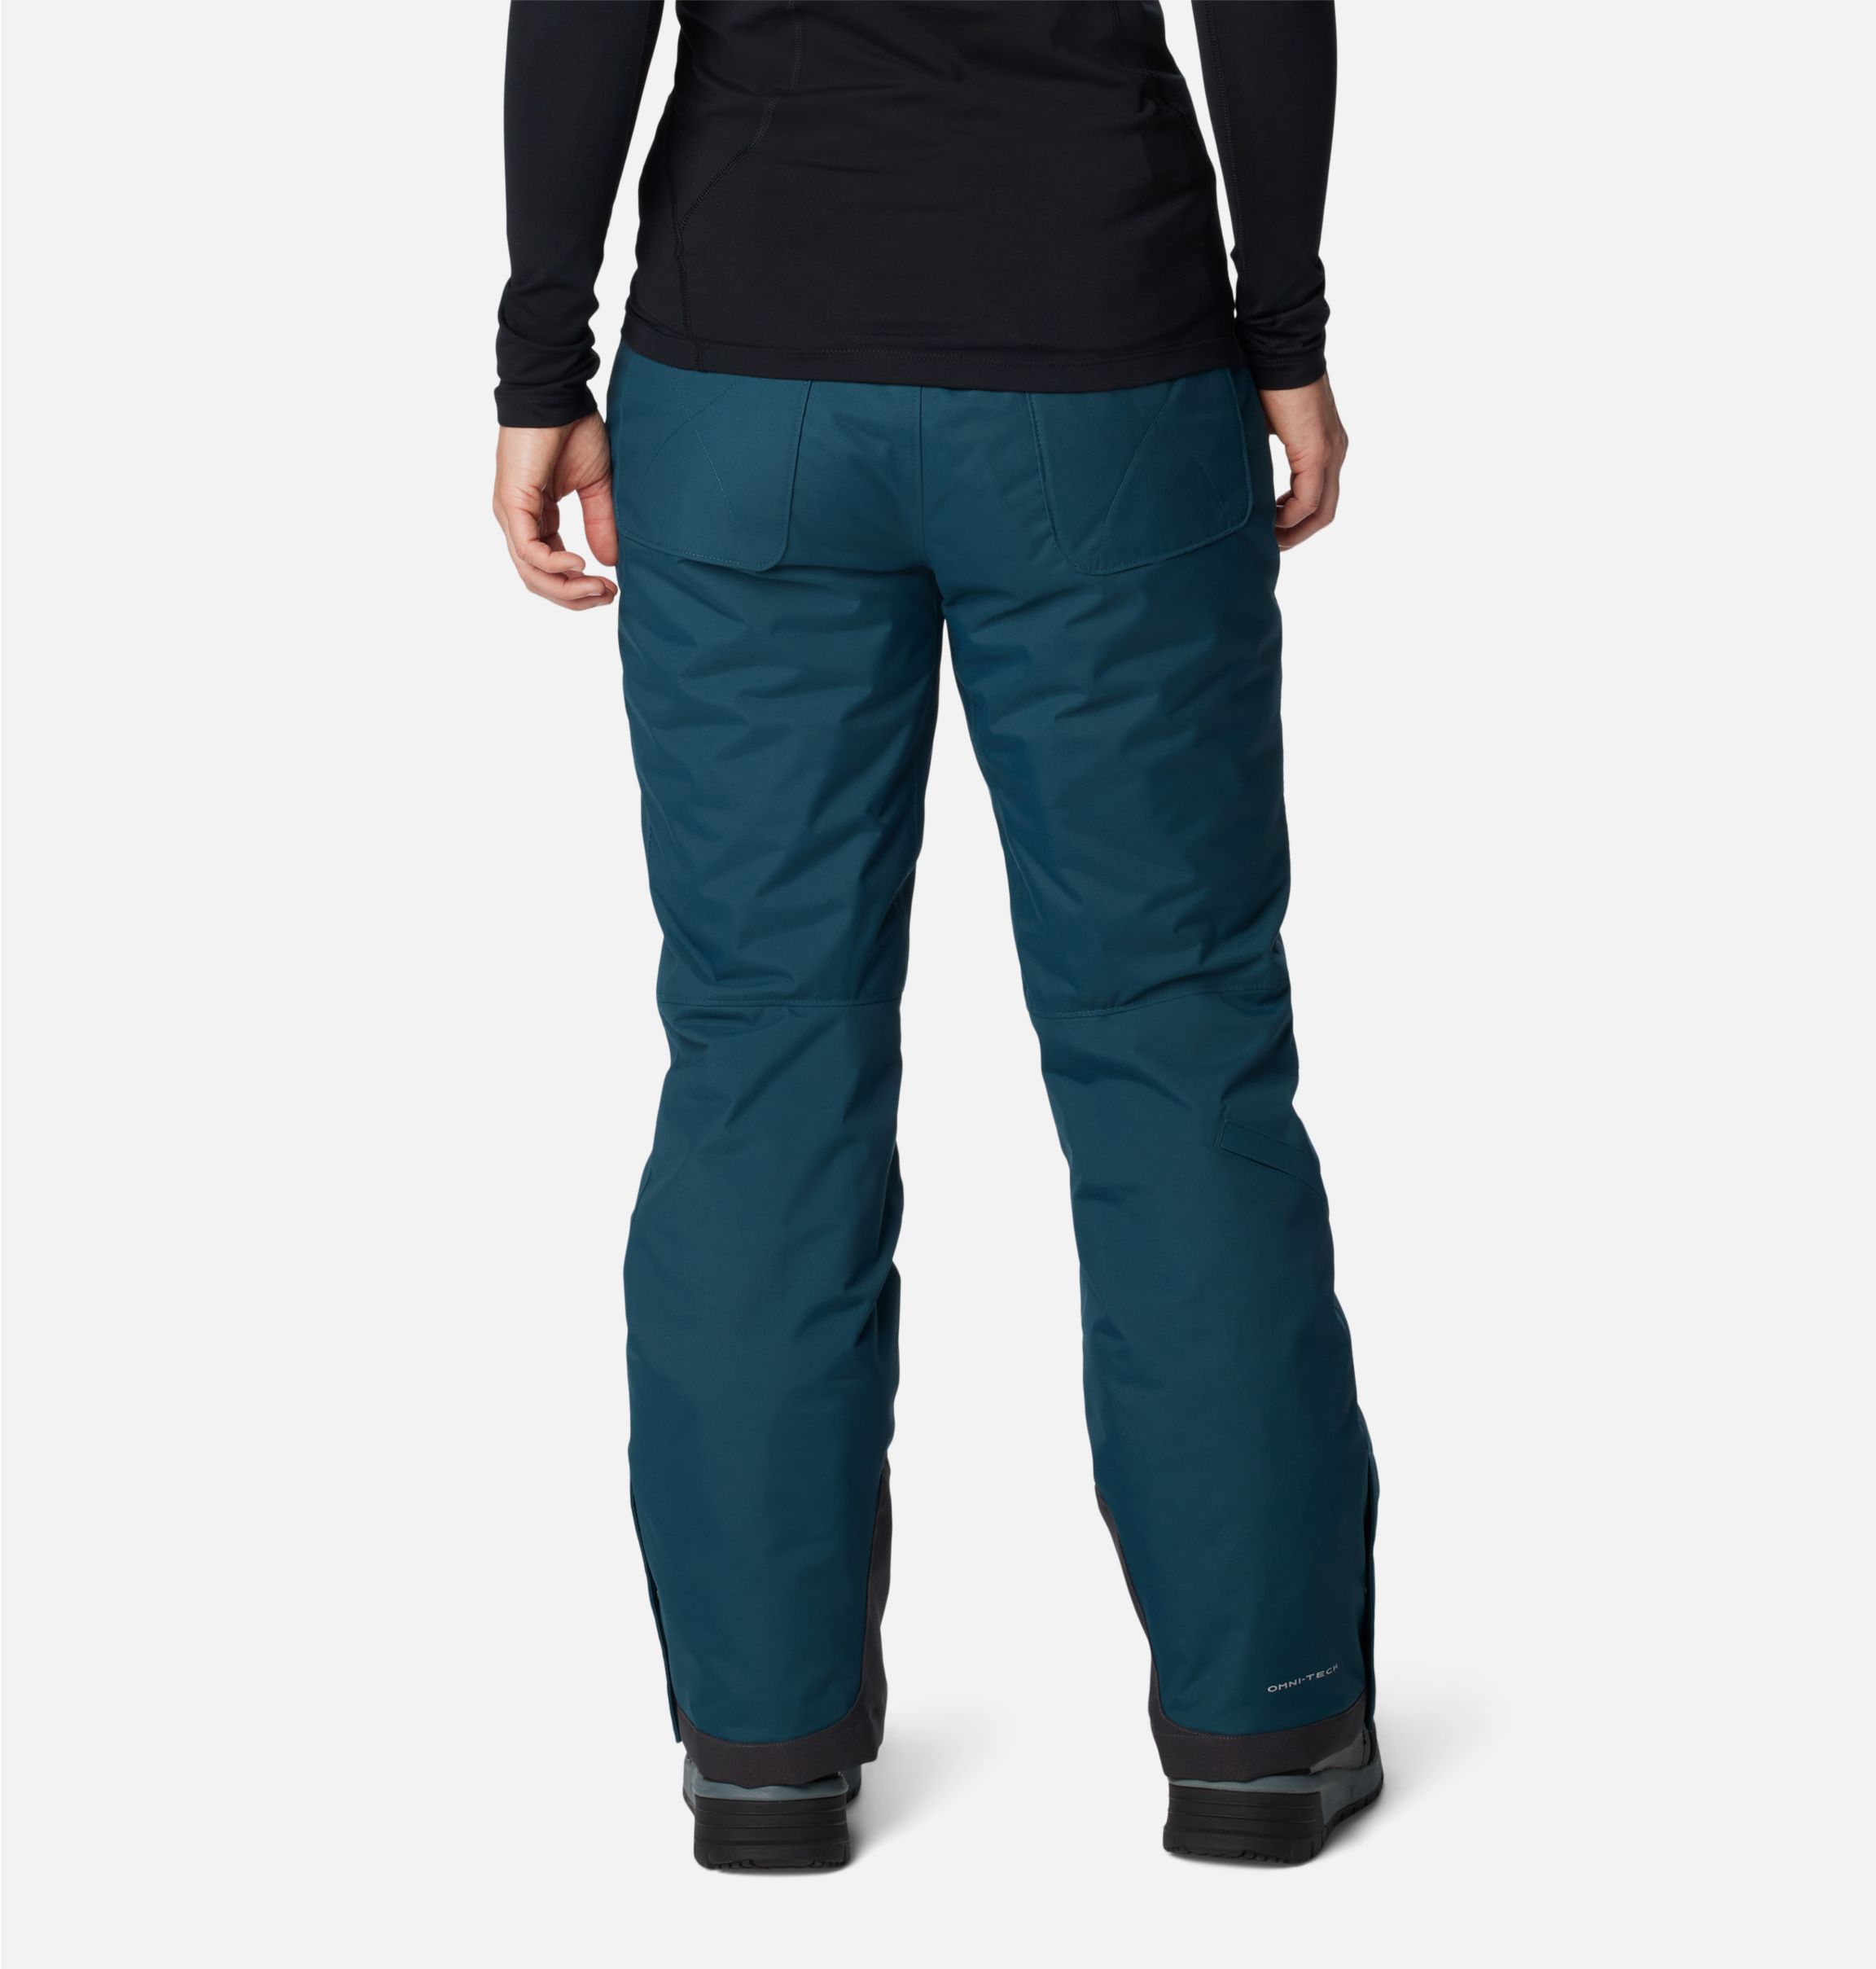 Columbia Snow Pants, Bugaboo Omni-Heat, Ladies - Time-Out Sports